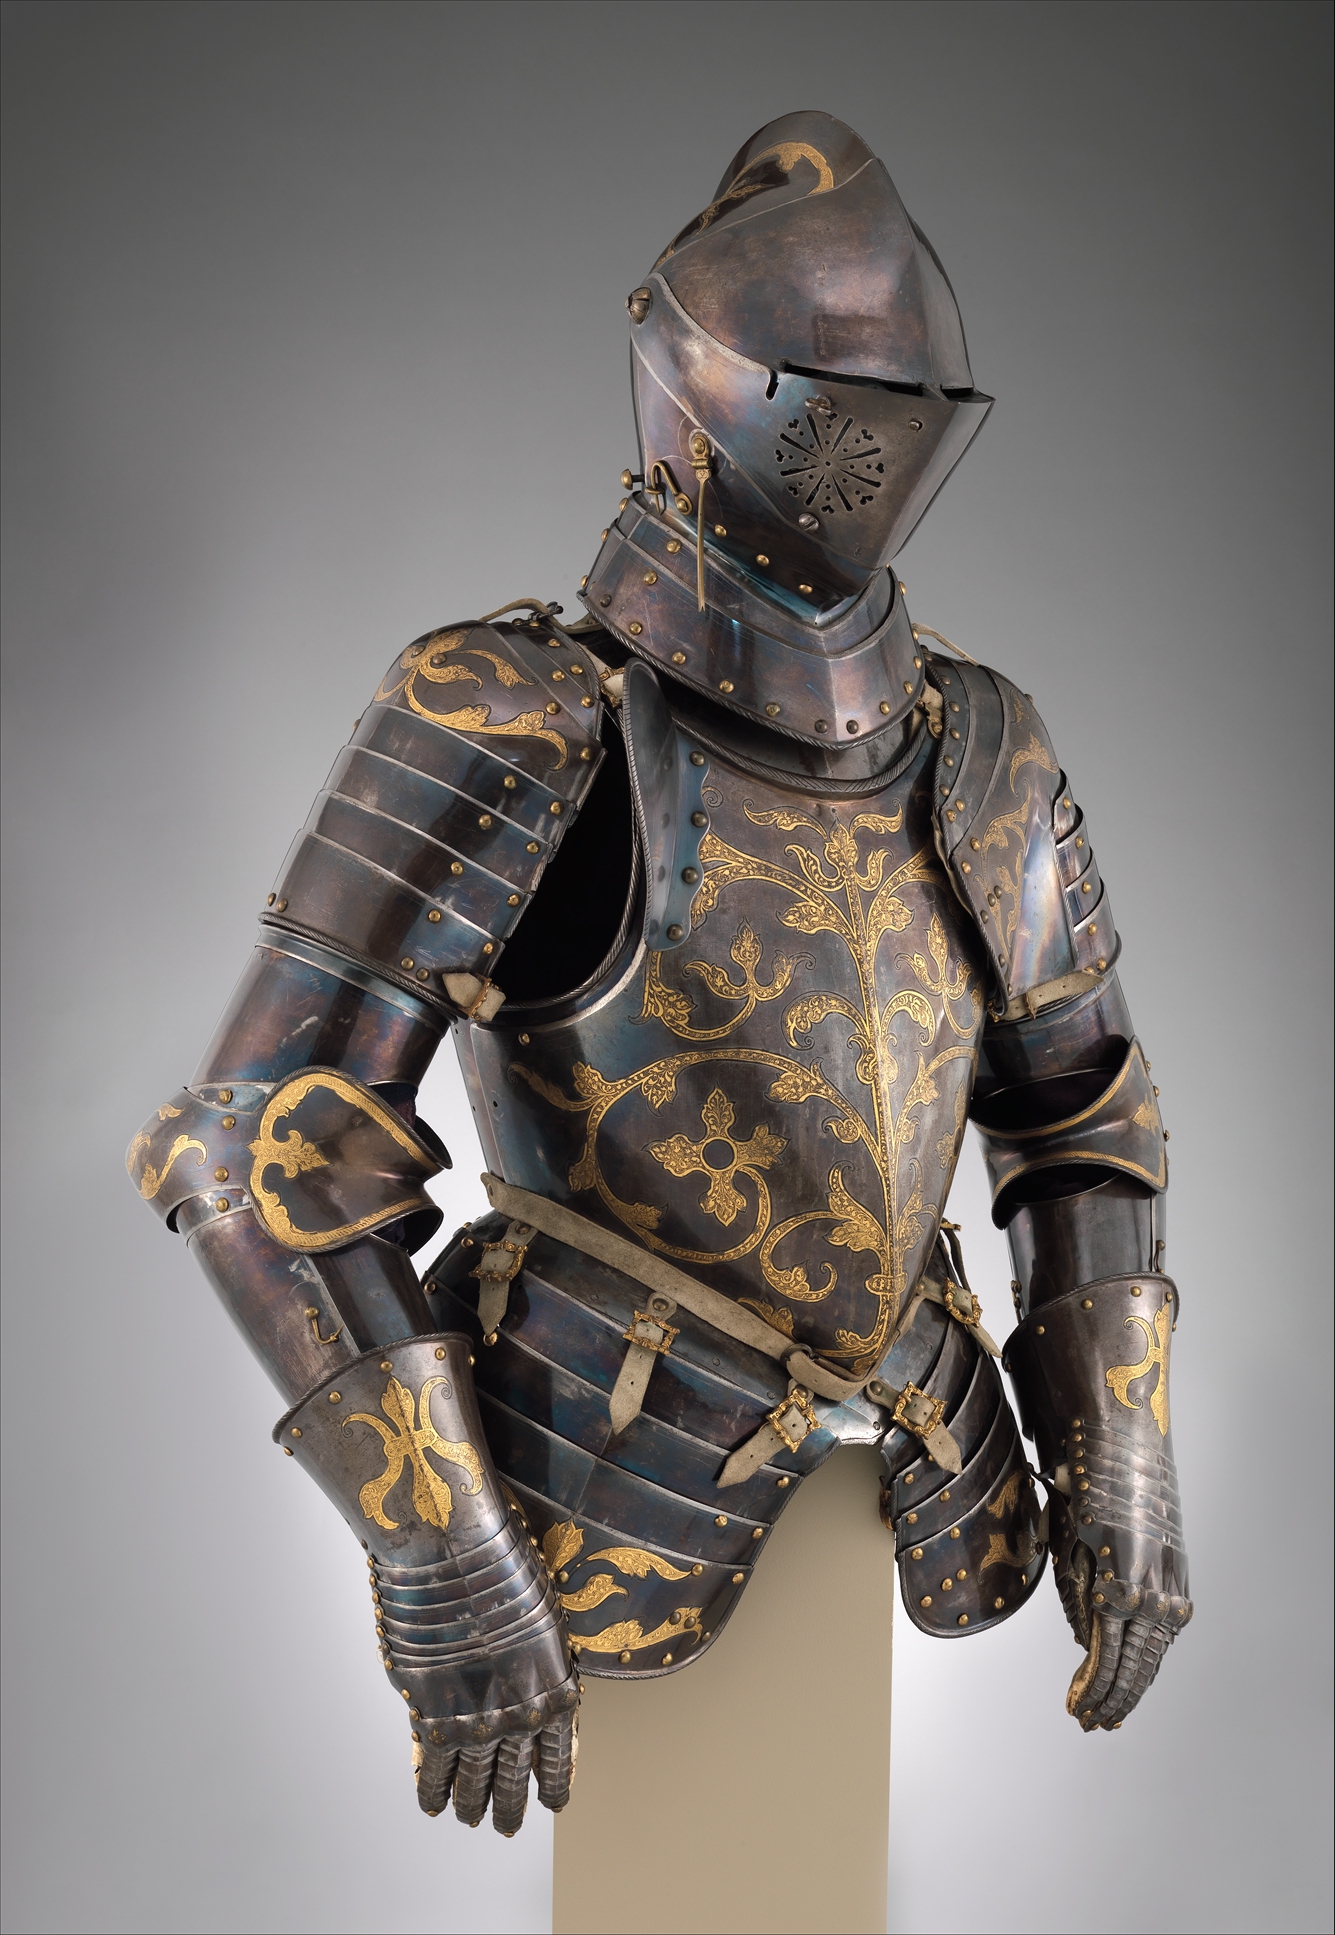 Anton Peffenhauser, Foot-Combat Armor of Prince-Elector Christian I of  Saxony (reigned 1586–91), German, Augsburg